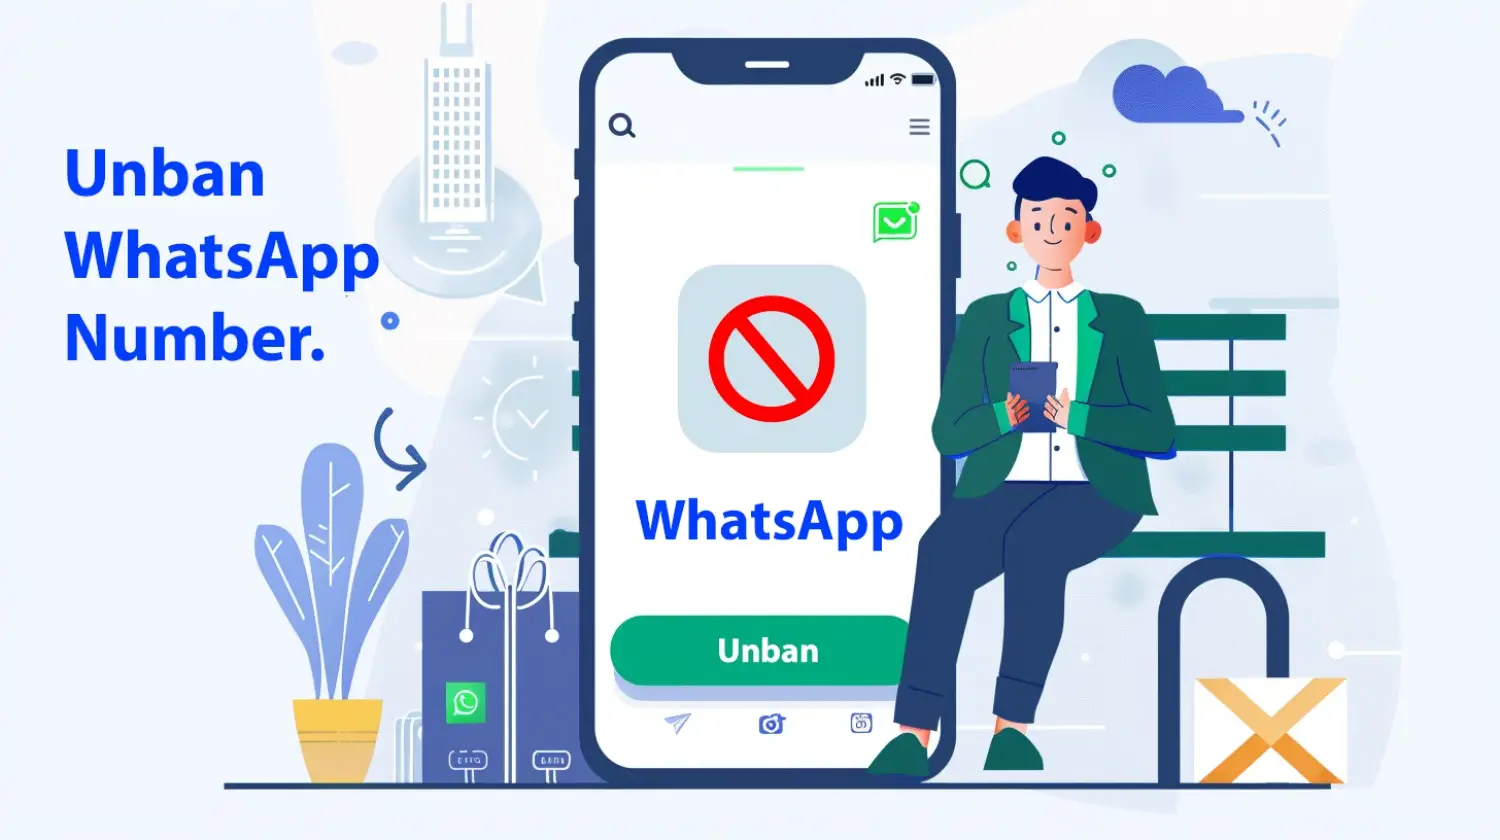 How to Unban WhatsApp Number